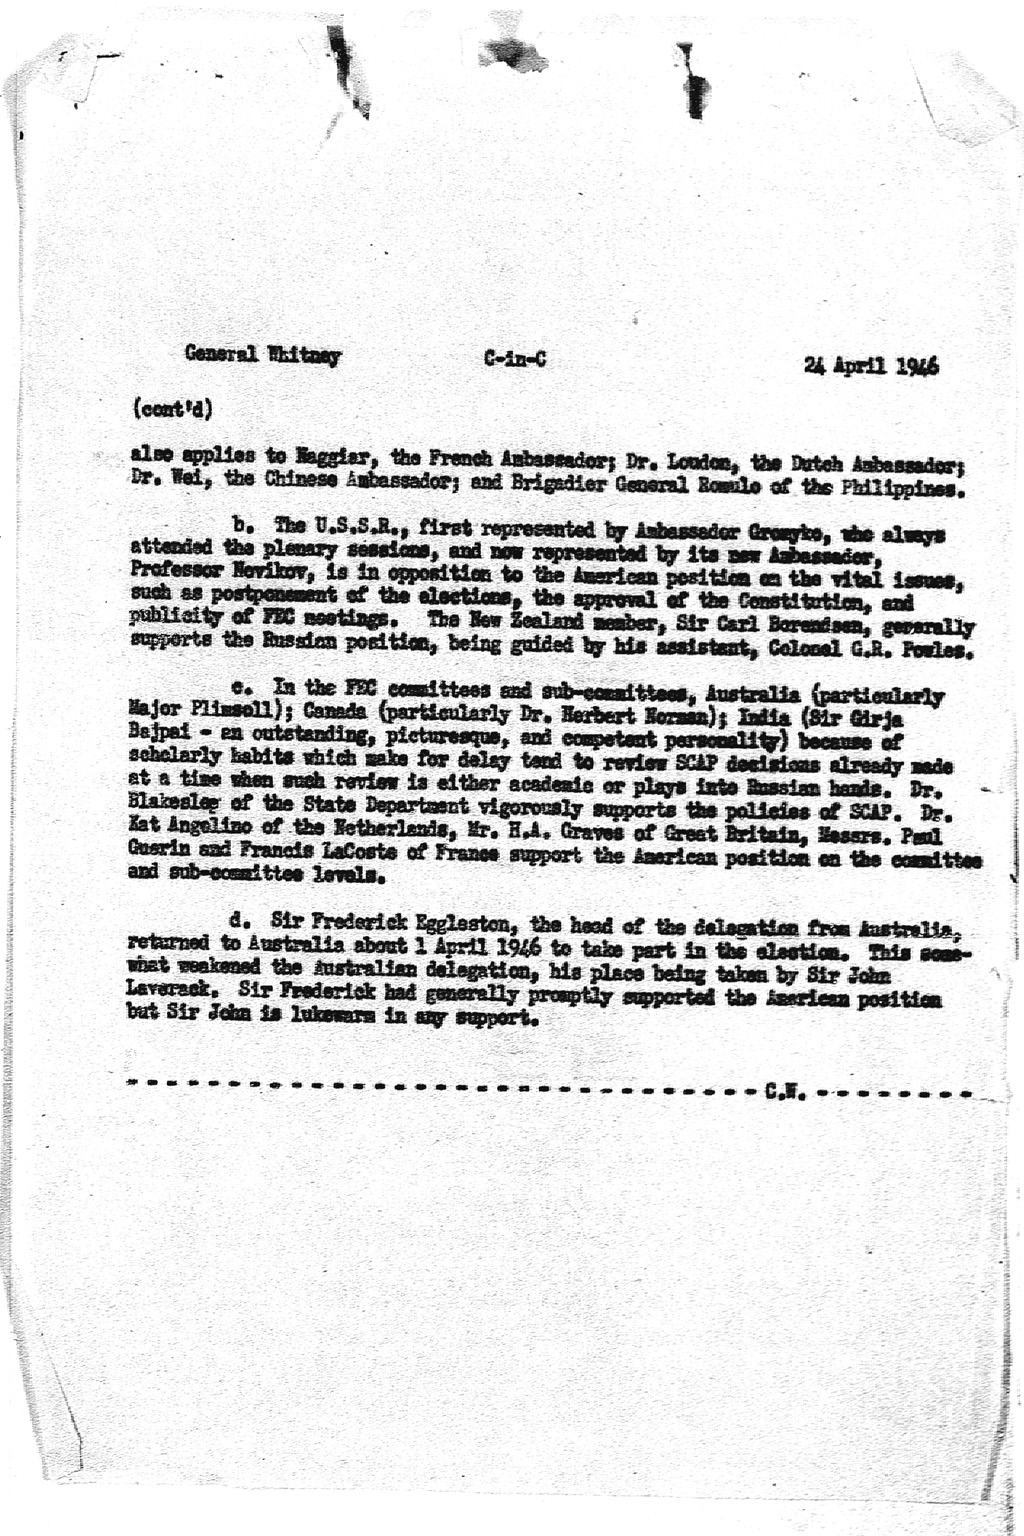 [From General Whitney to C-in-C, dated 24 April 1946 re discussion on 22 April 1946 with Professor Colegrove](Larger image)